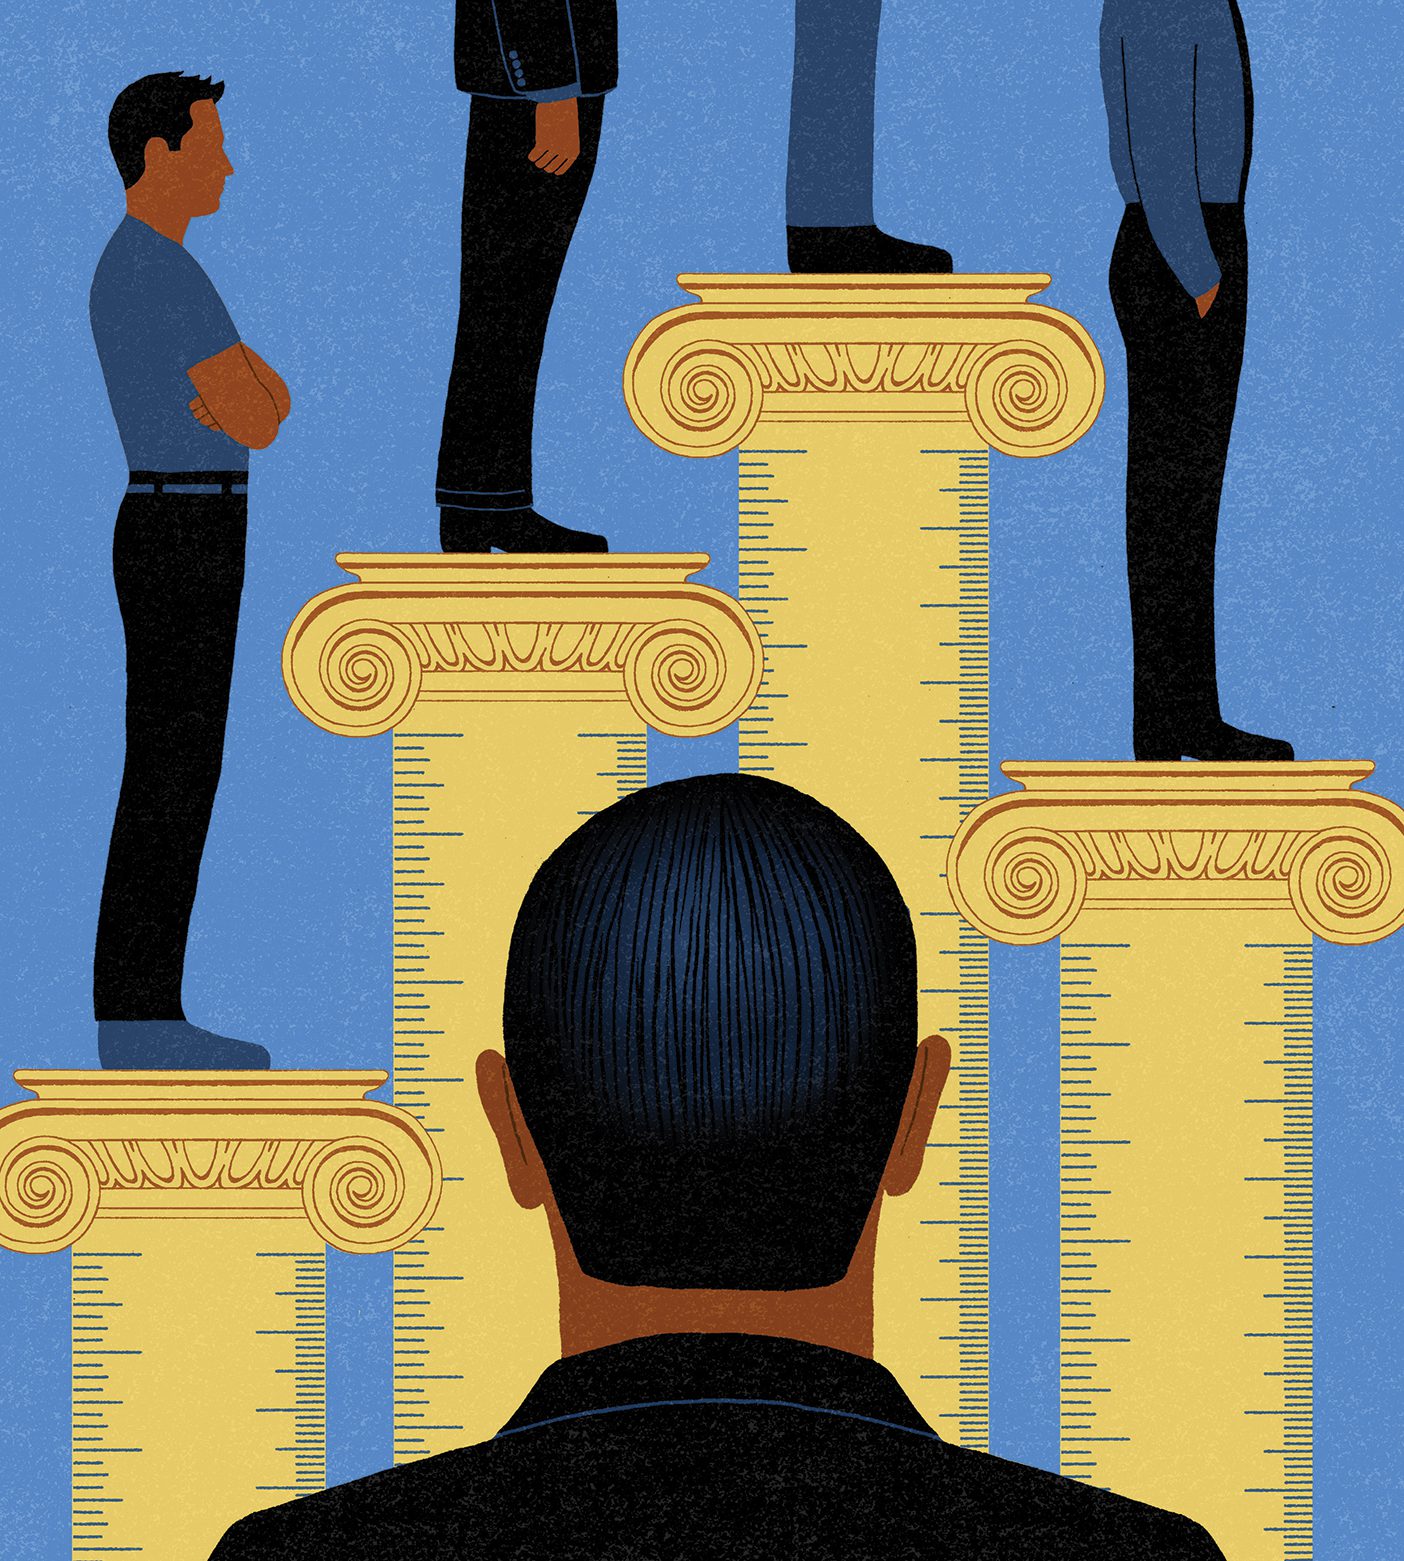 Illustration of men standing on columns of different heights that are decorated with ruler markings. The back of a man's head is in the foreground.